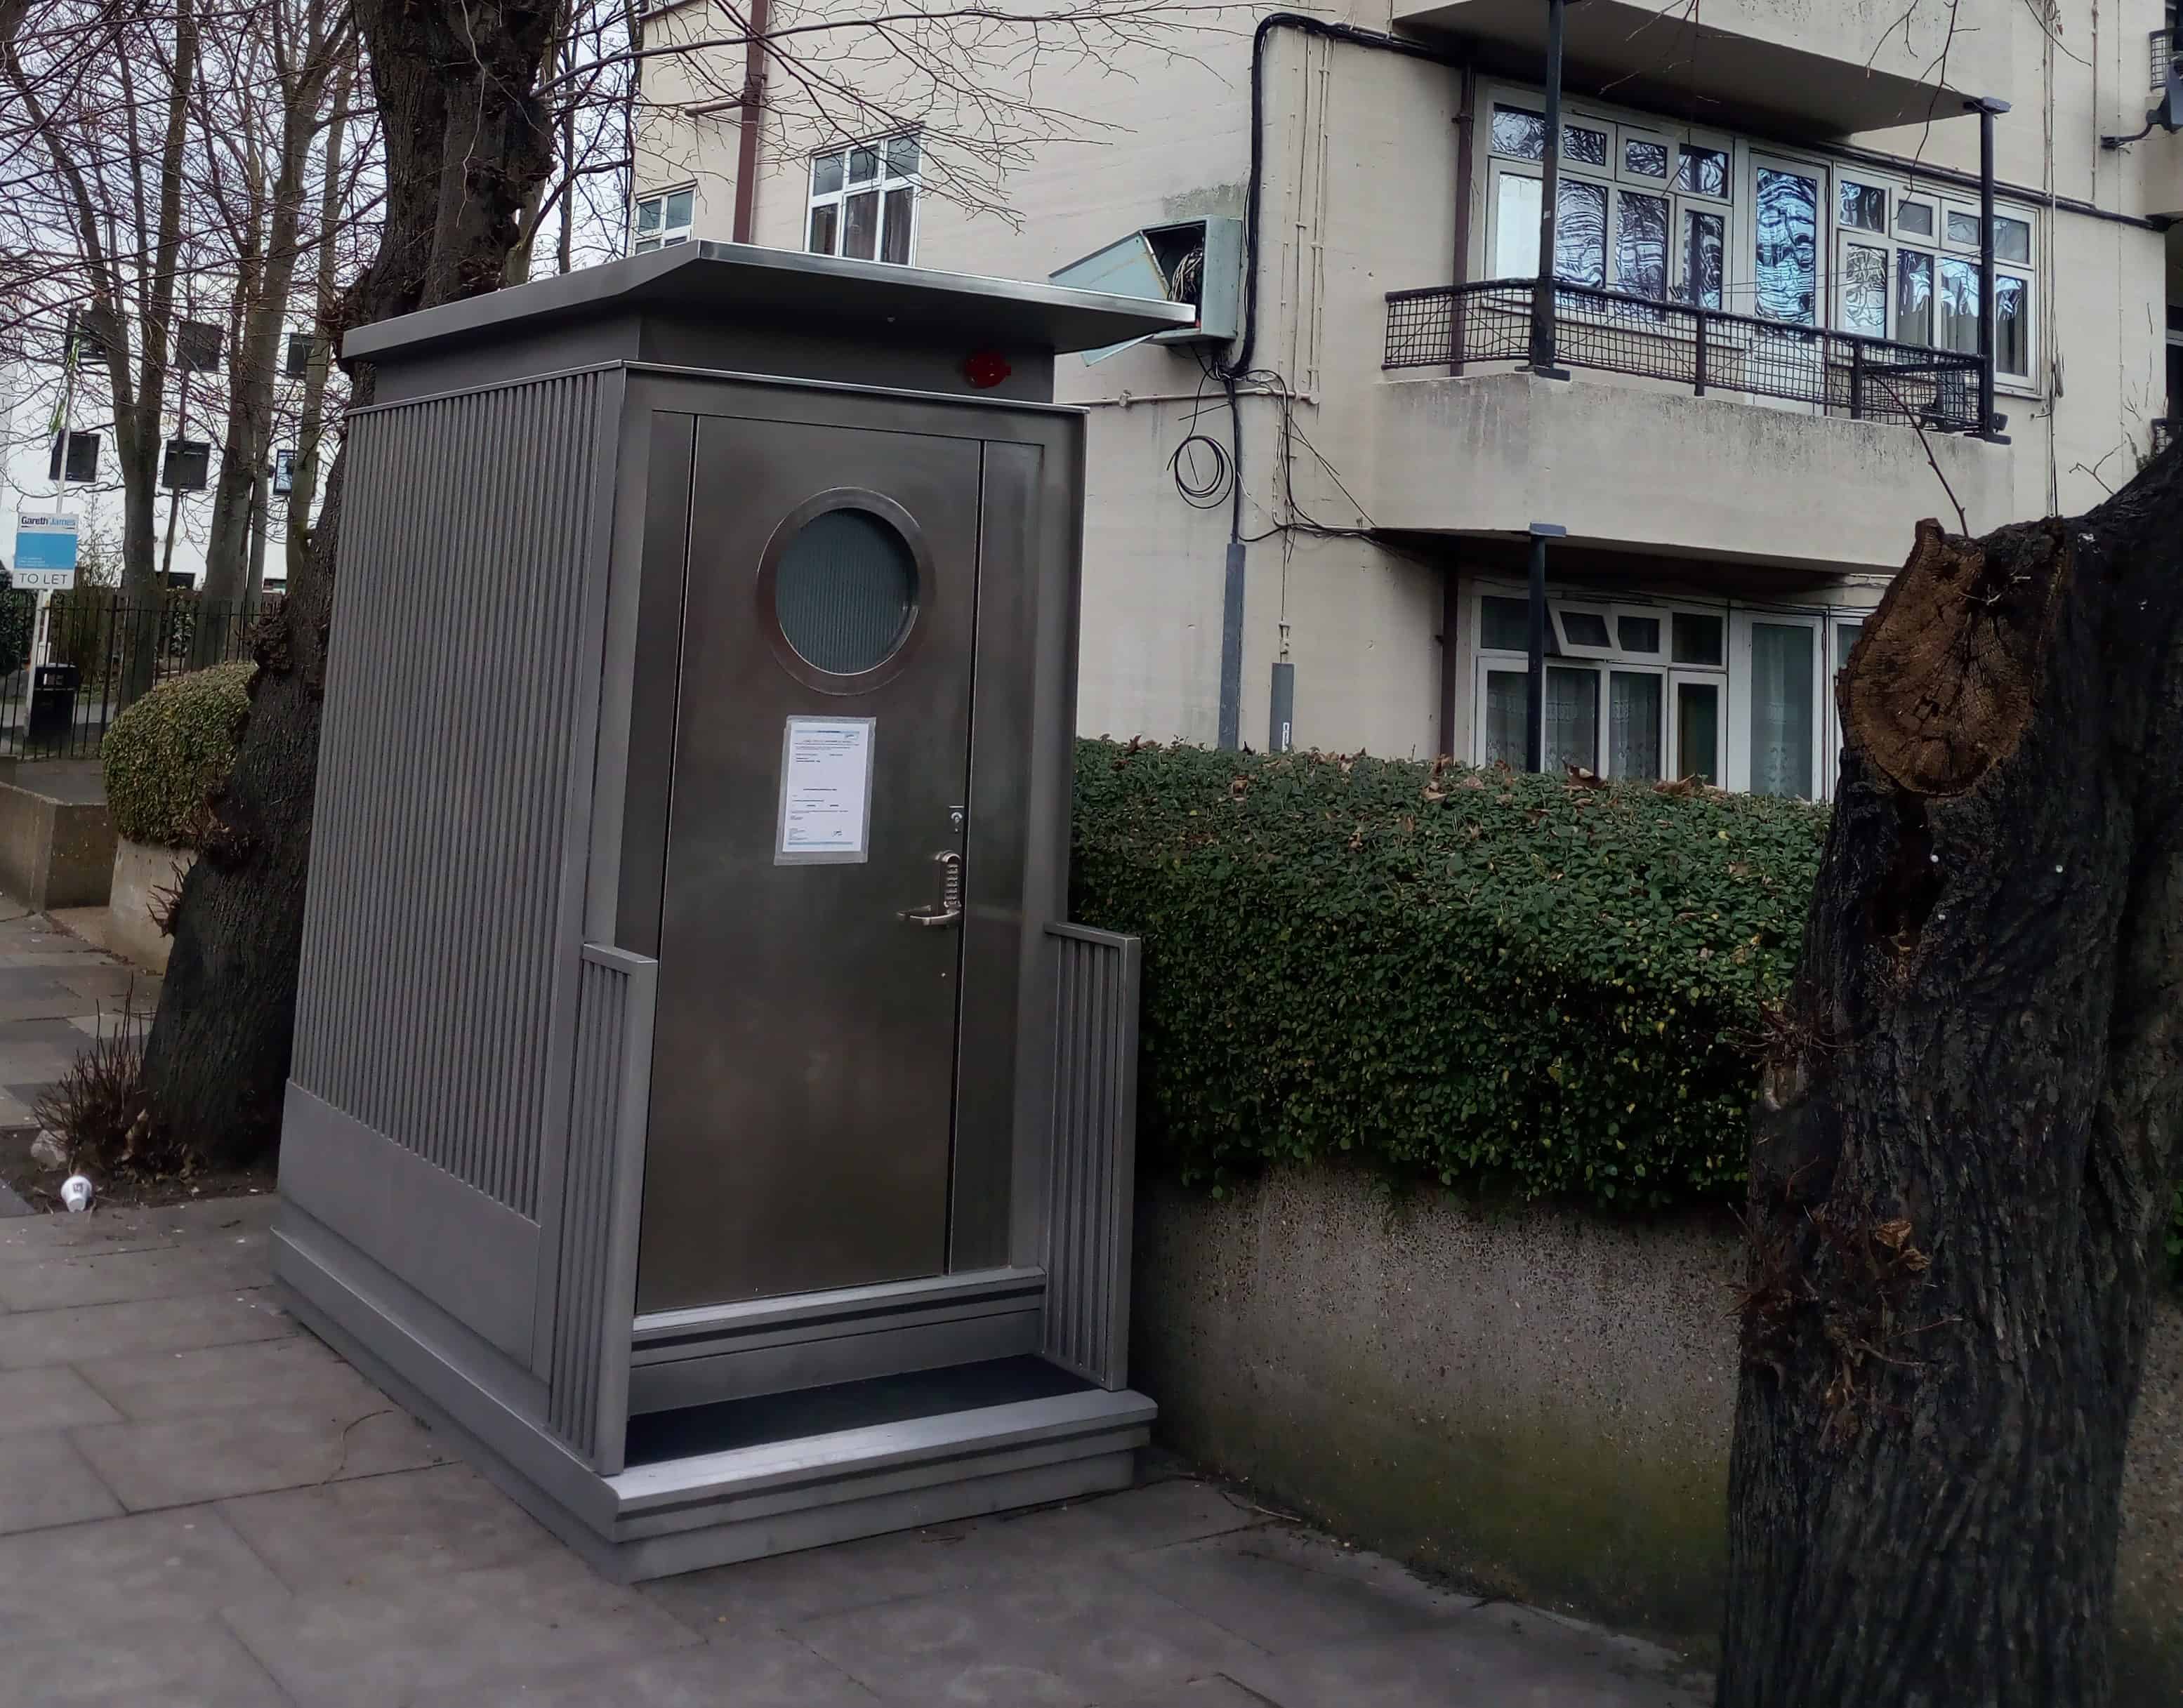 The "Turdis" was installed in December but now a petition has been started to have it moved